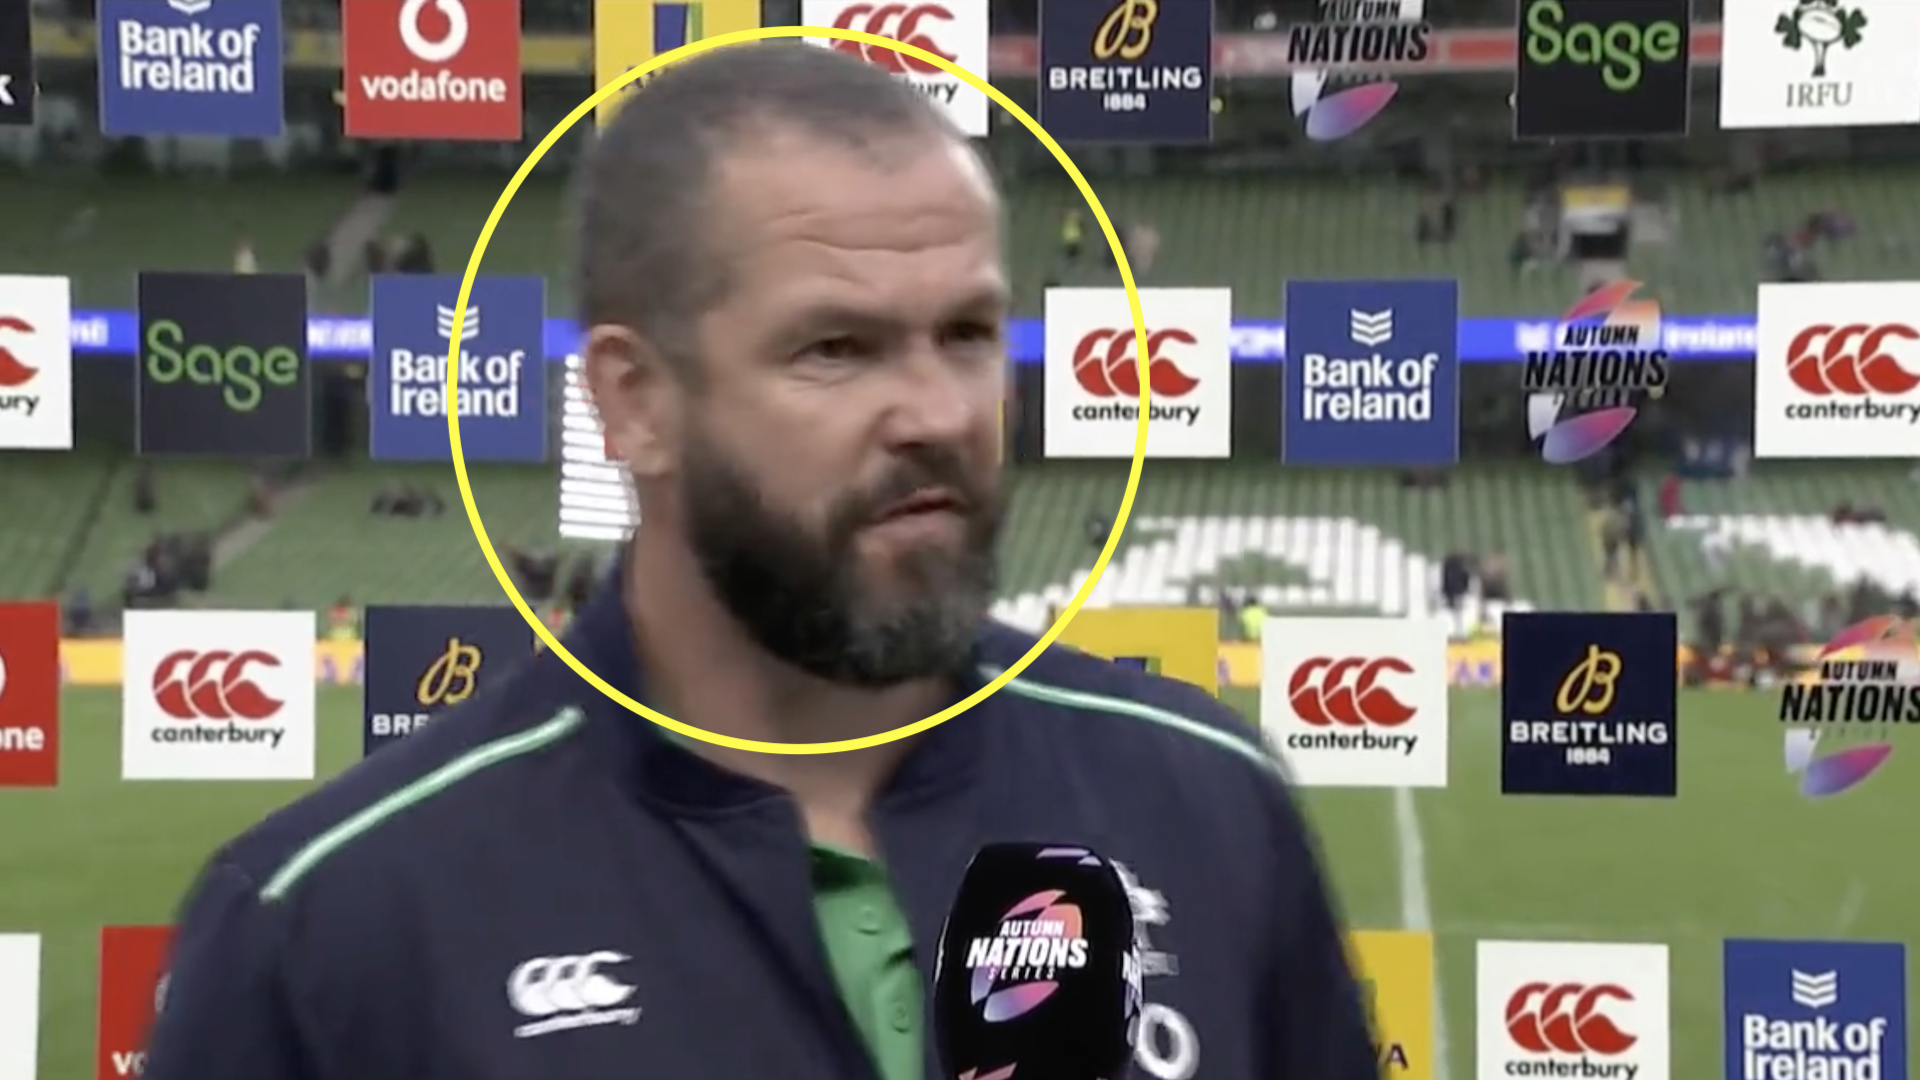 Andy Farrell doesn't hold back as he savages Ireland in extreme tirade